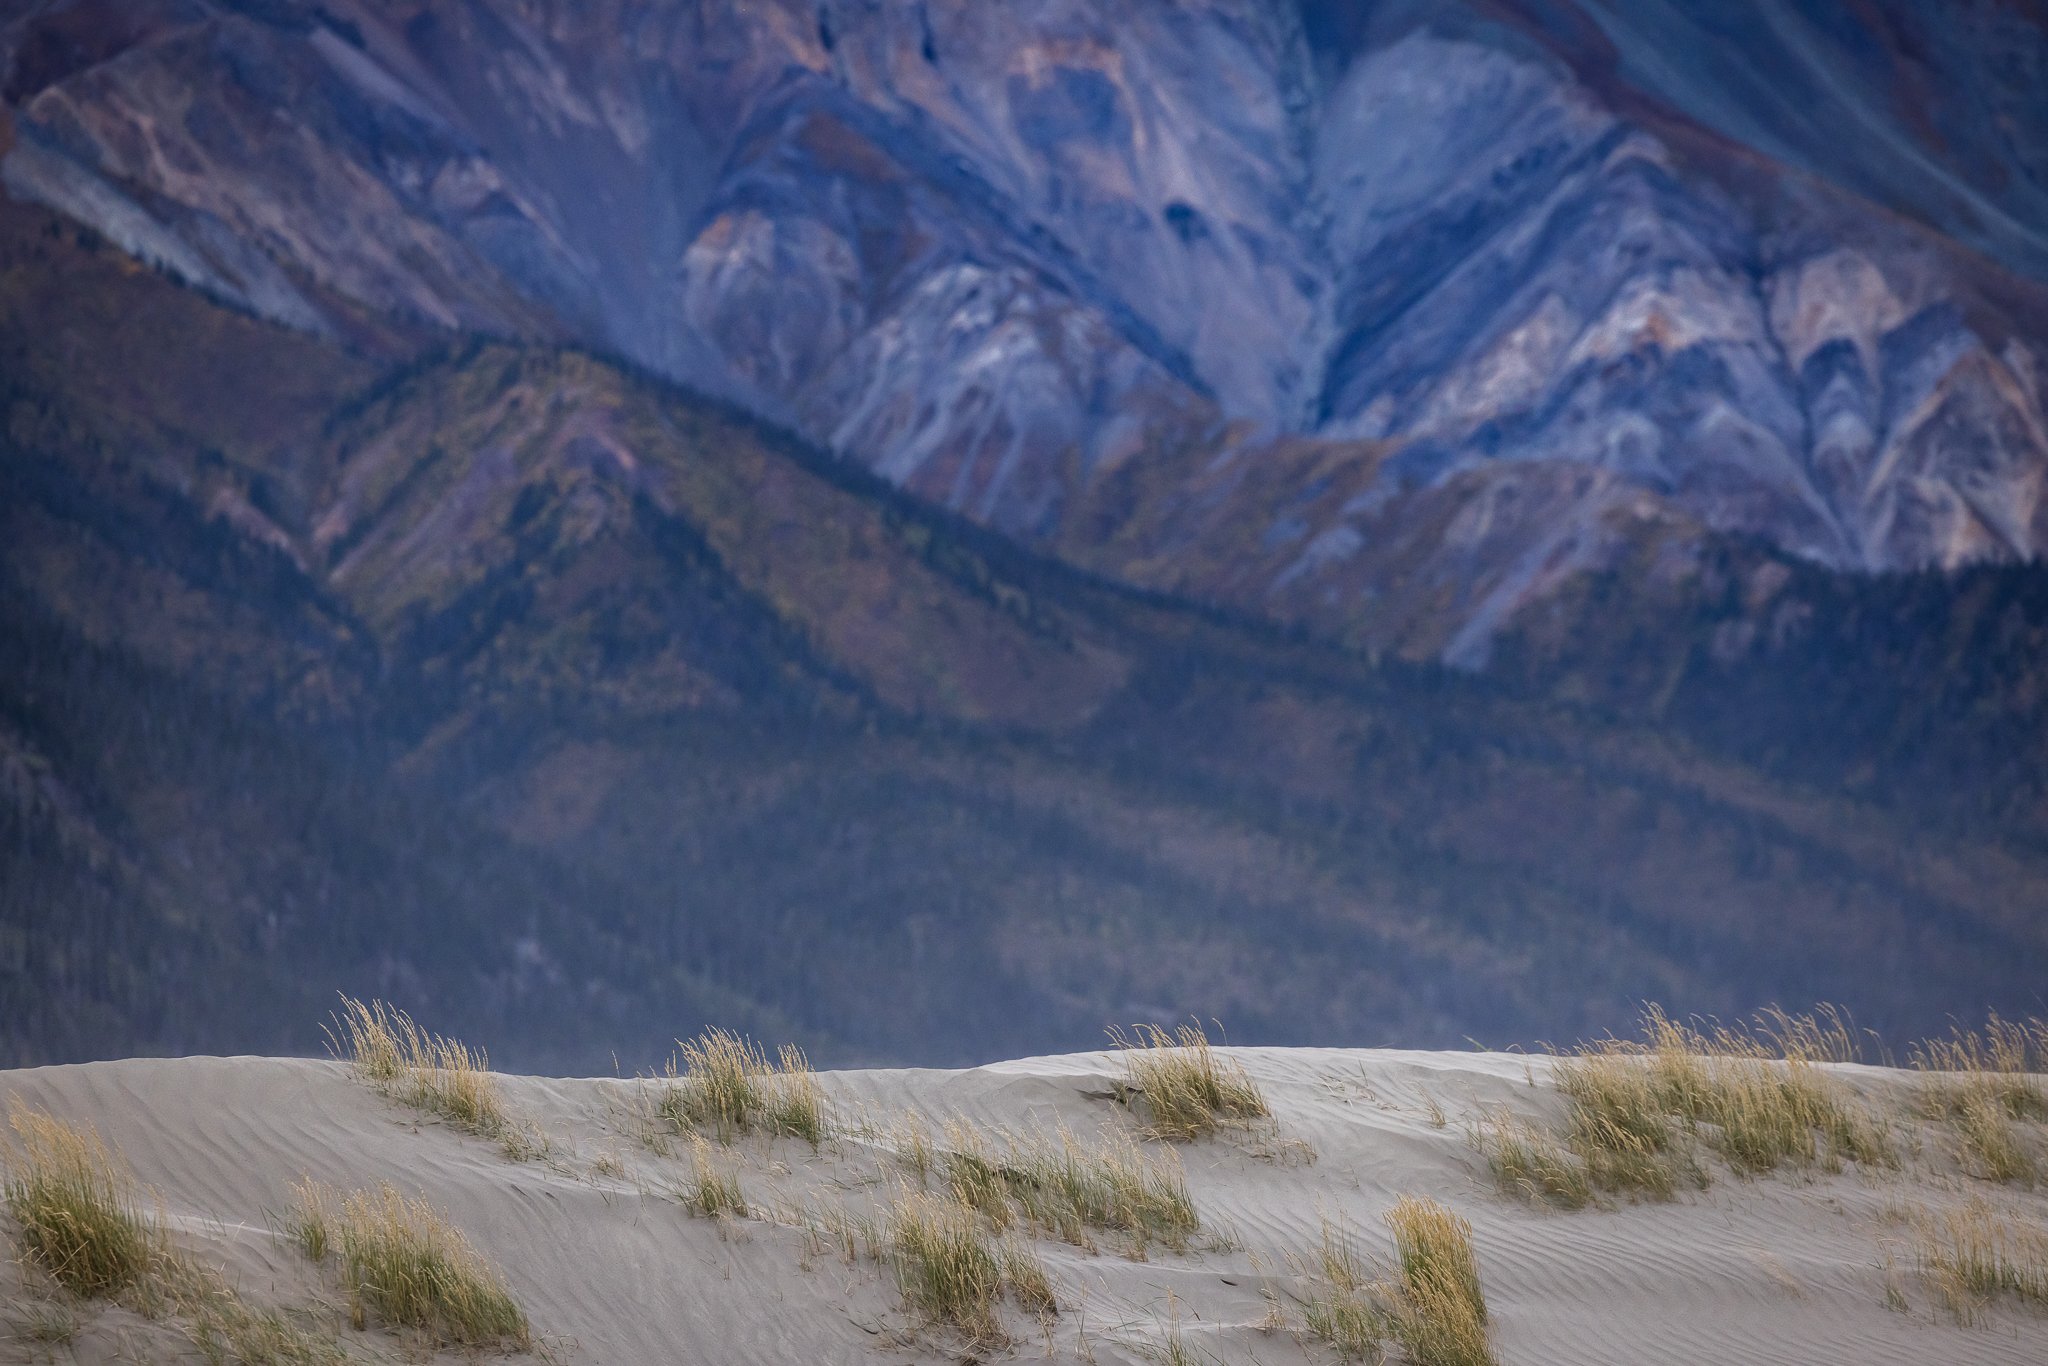  Sand dunes and mountains. 